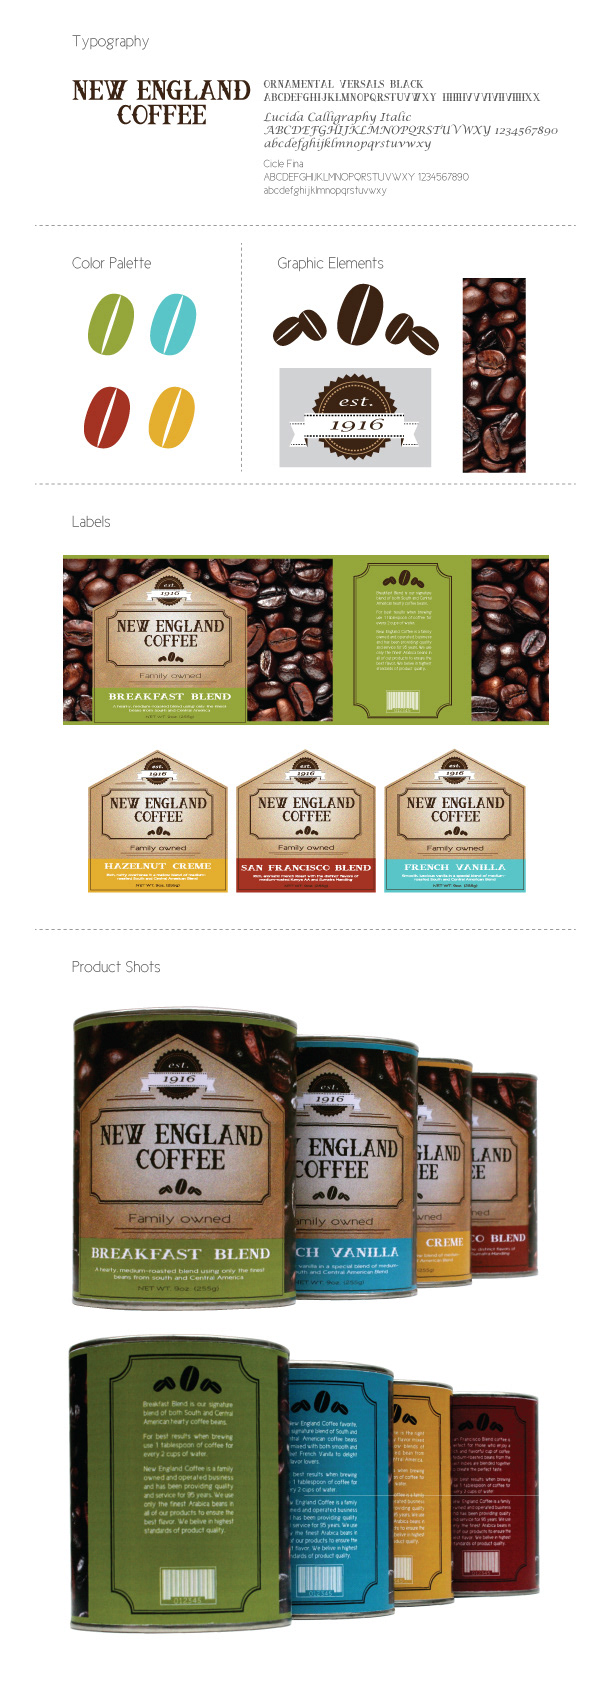 New England Coffee Coffee redesign package coffee cans labels type coffee bean french vanilla san francisco blend hazelnut breakfast blend family owned